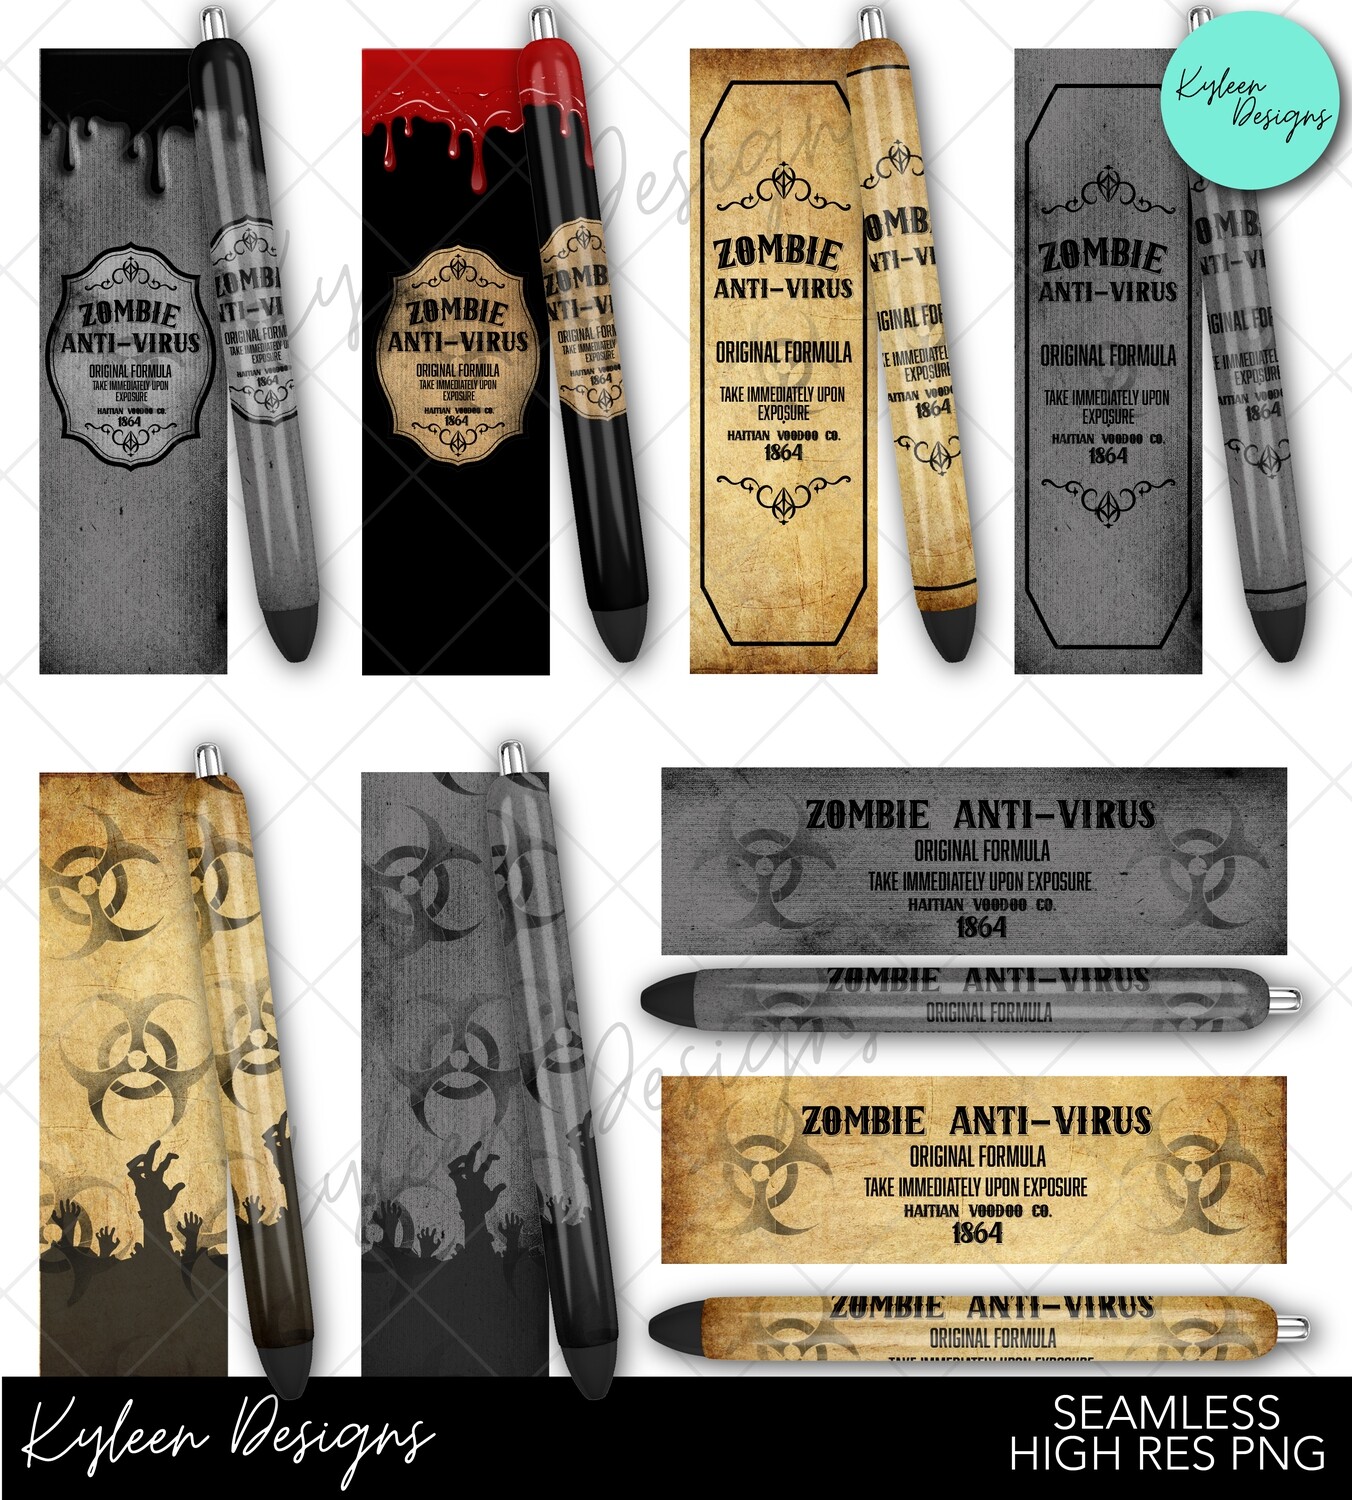 Seamless Zombie Pen Wrappers™  for waterslide High Res PNG file